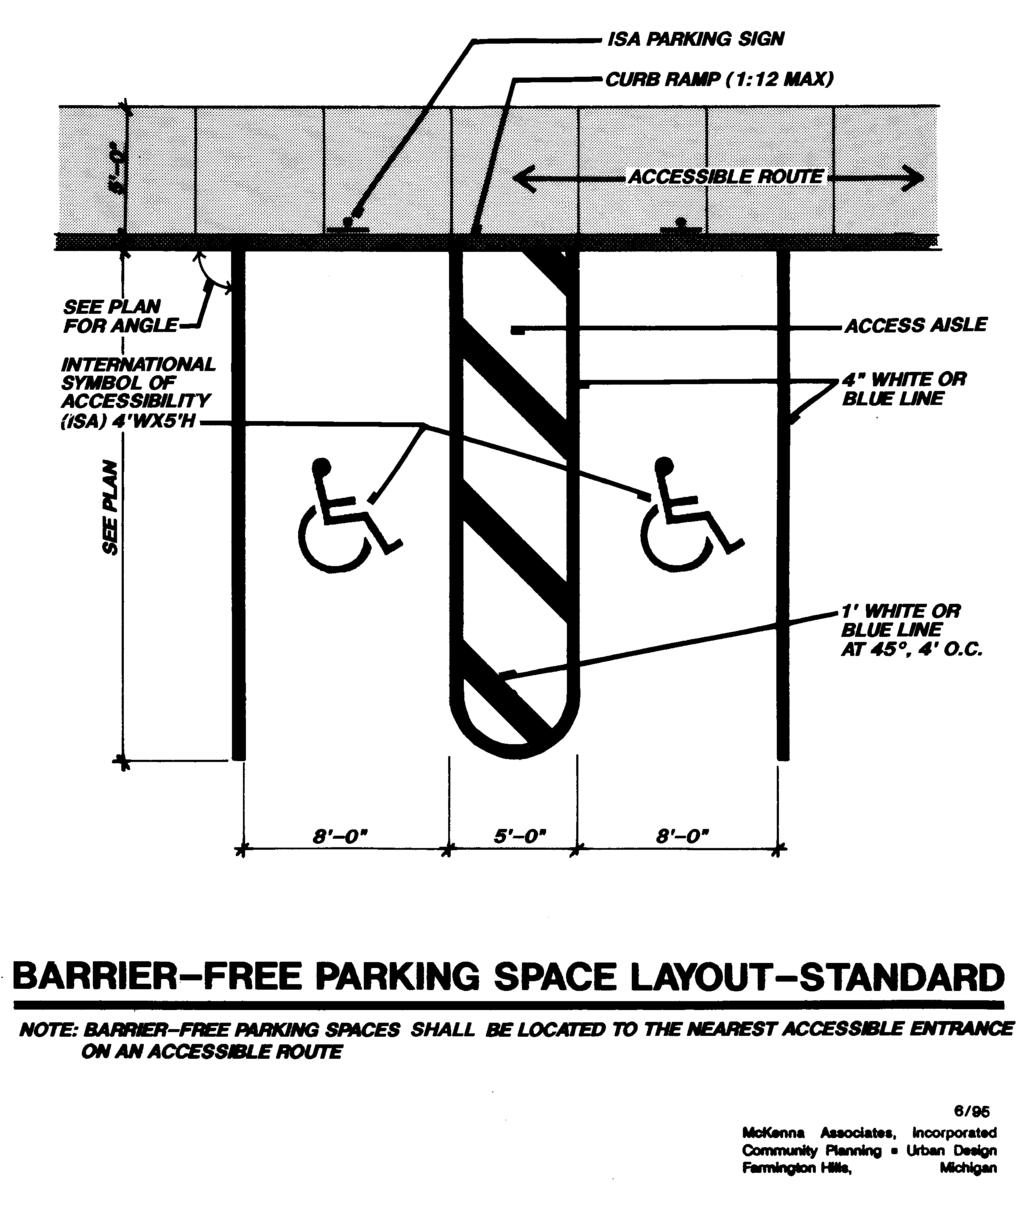 Section 9.05 Design Requirements. A. Barrier-Free Parking Requirements.